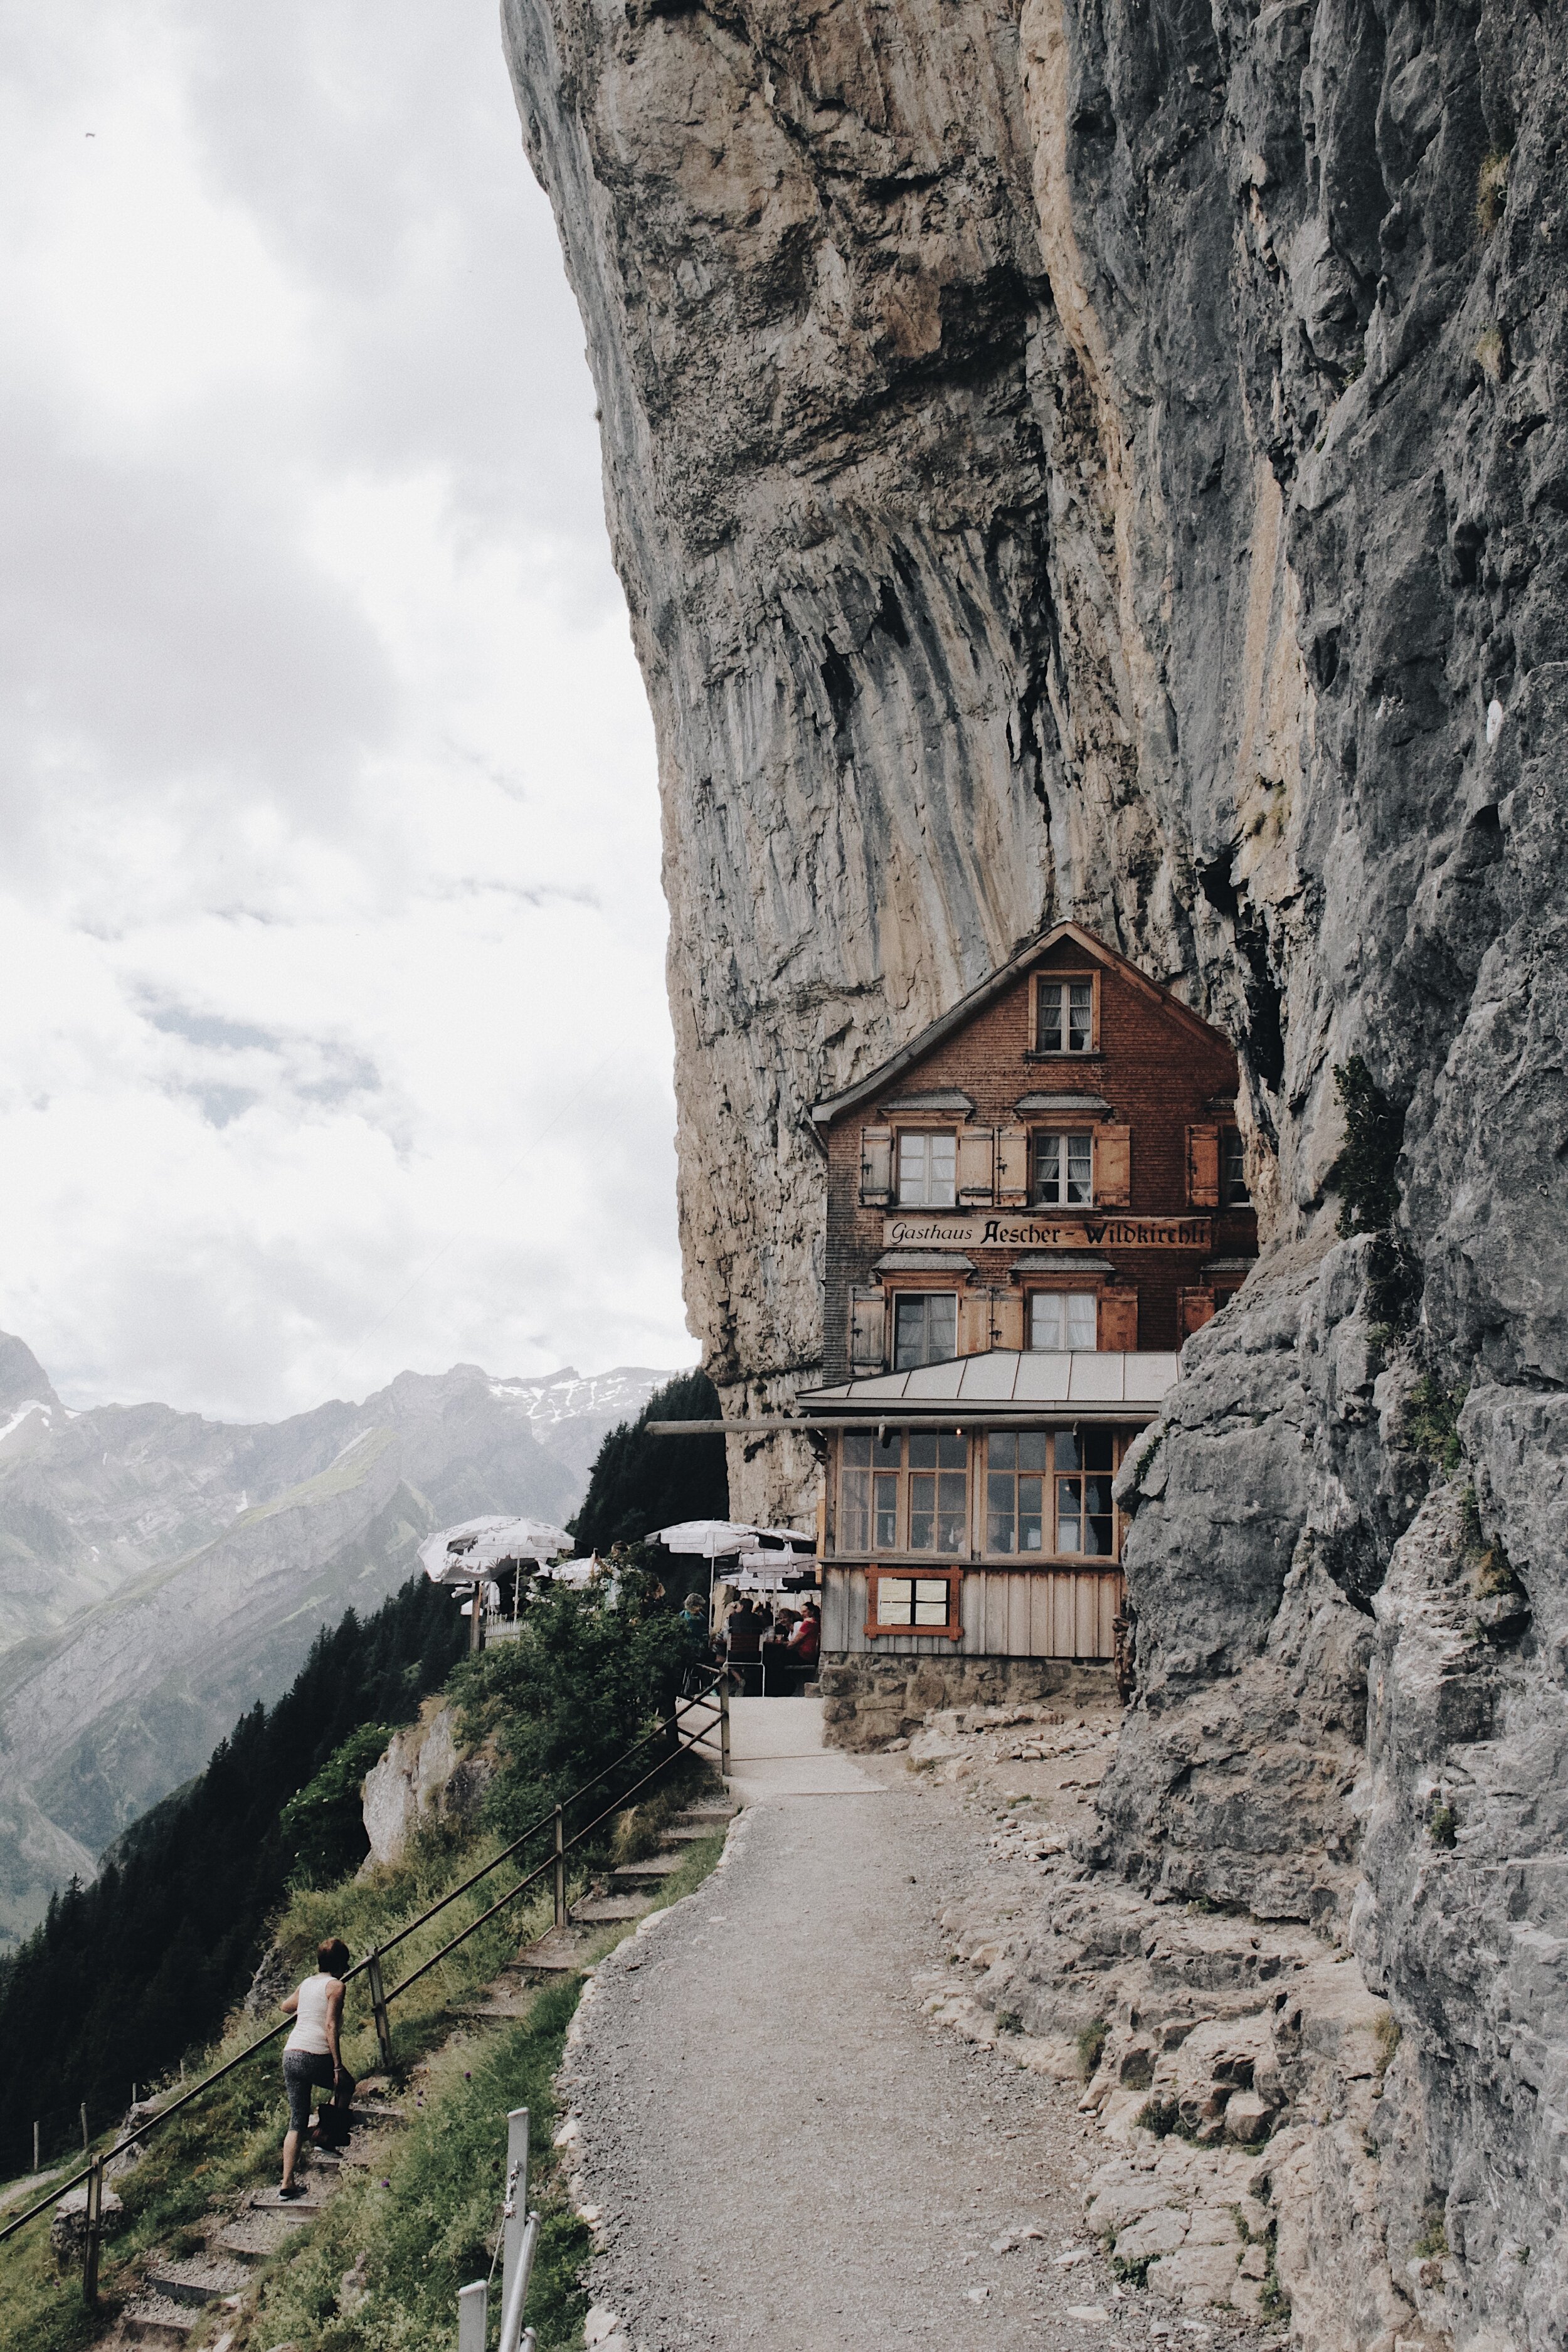 brown-wooden-house-on-edge-of-cliff-1028225.jpg